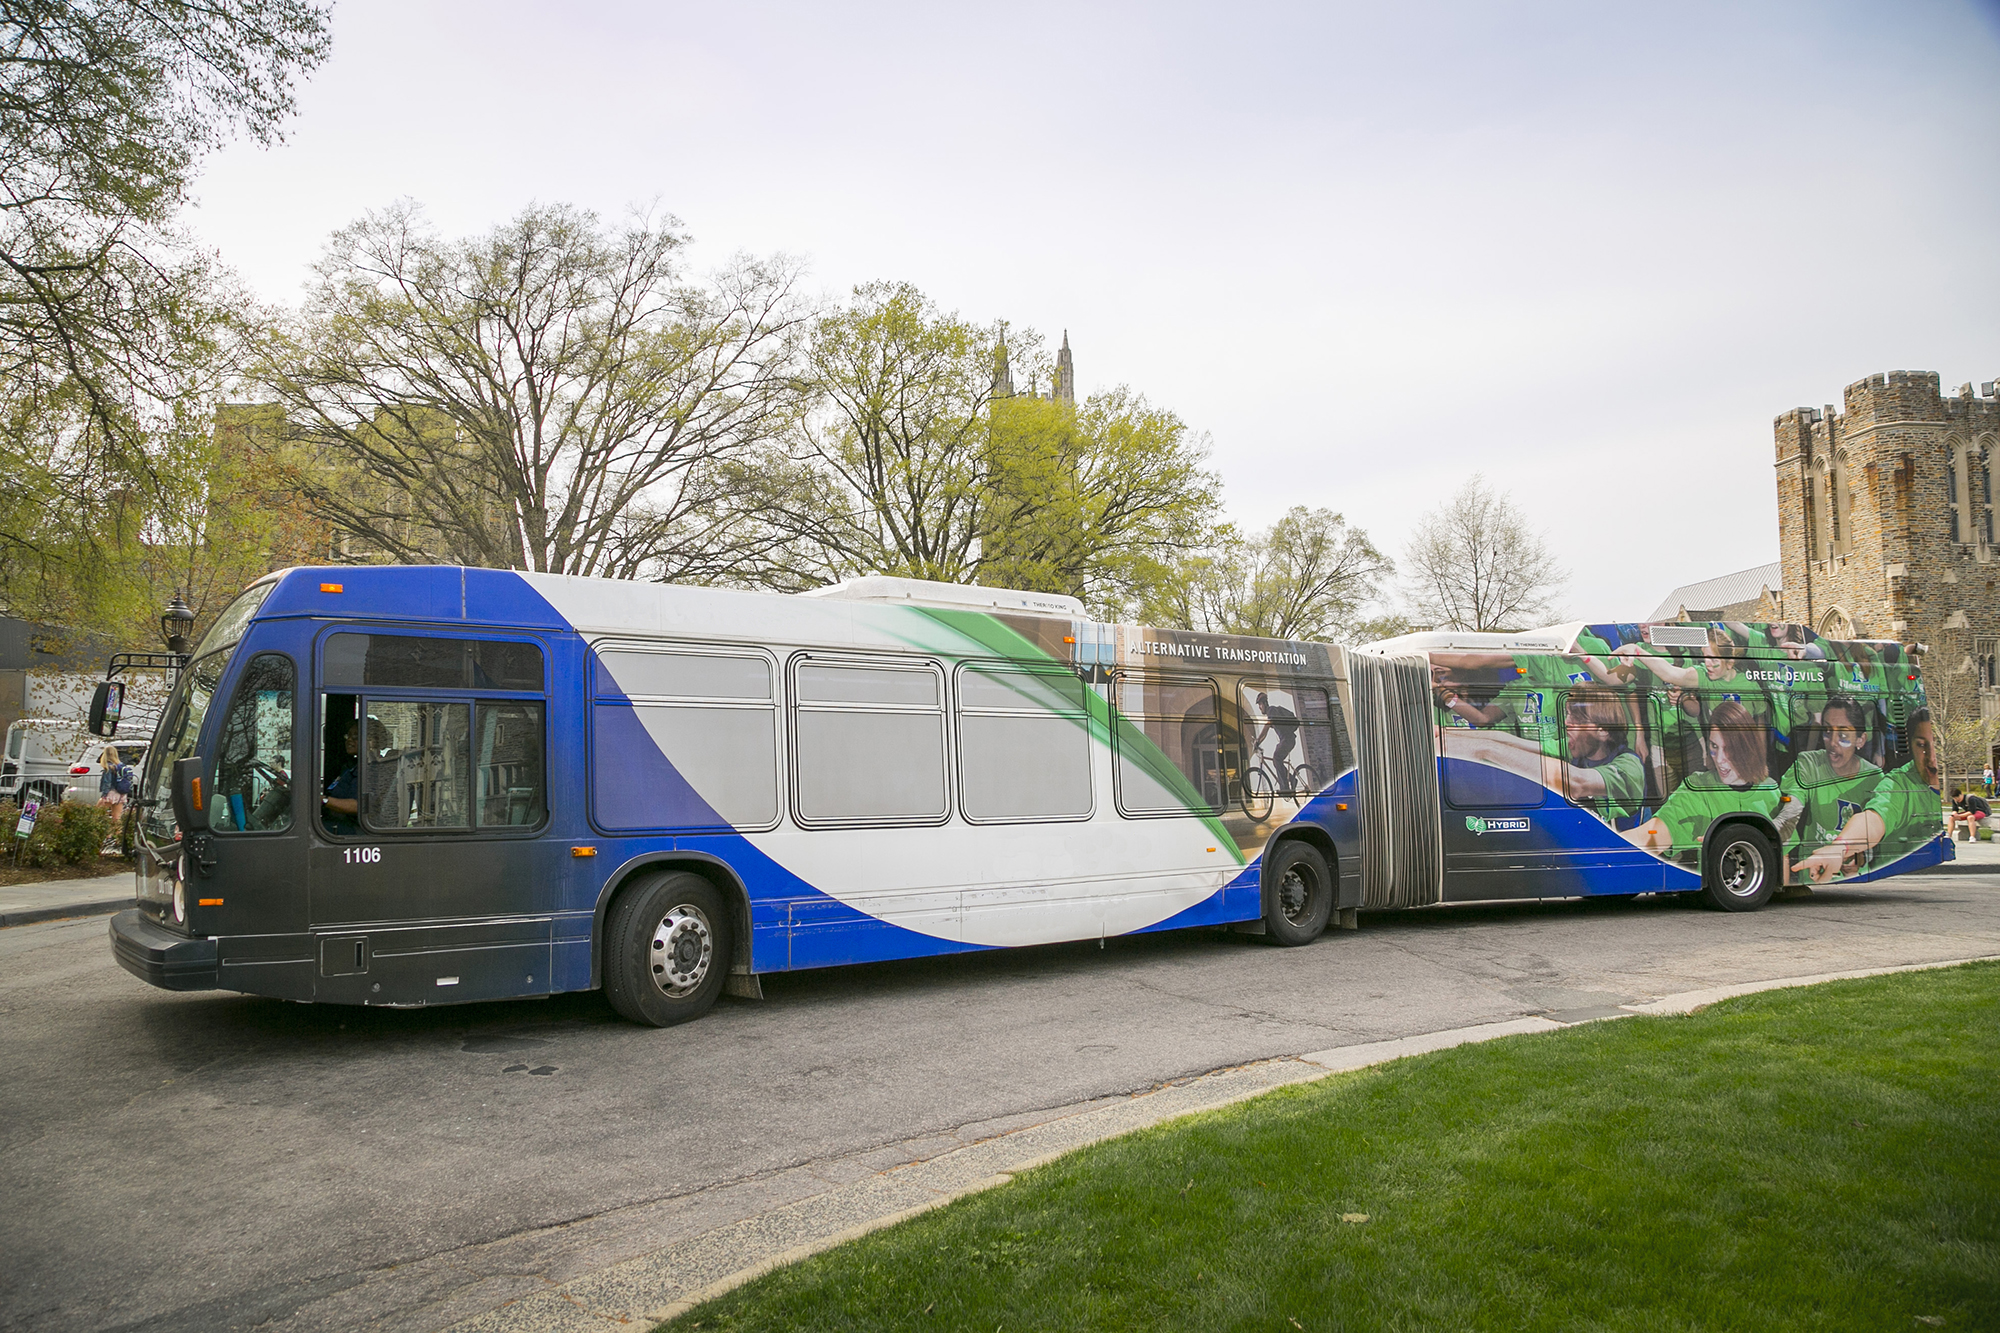 New double length articulated bus pulls up to pick up students